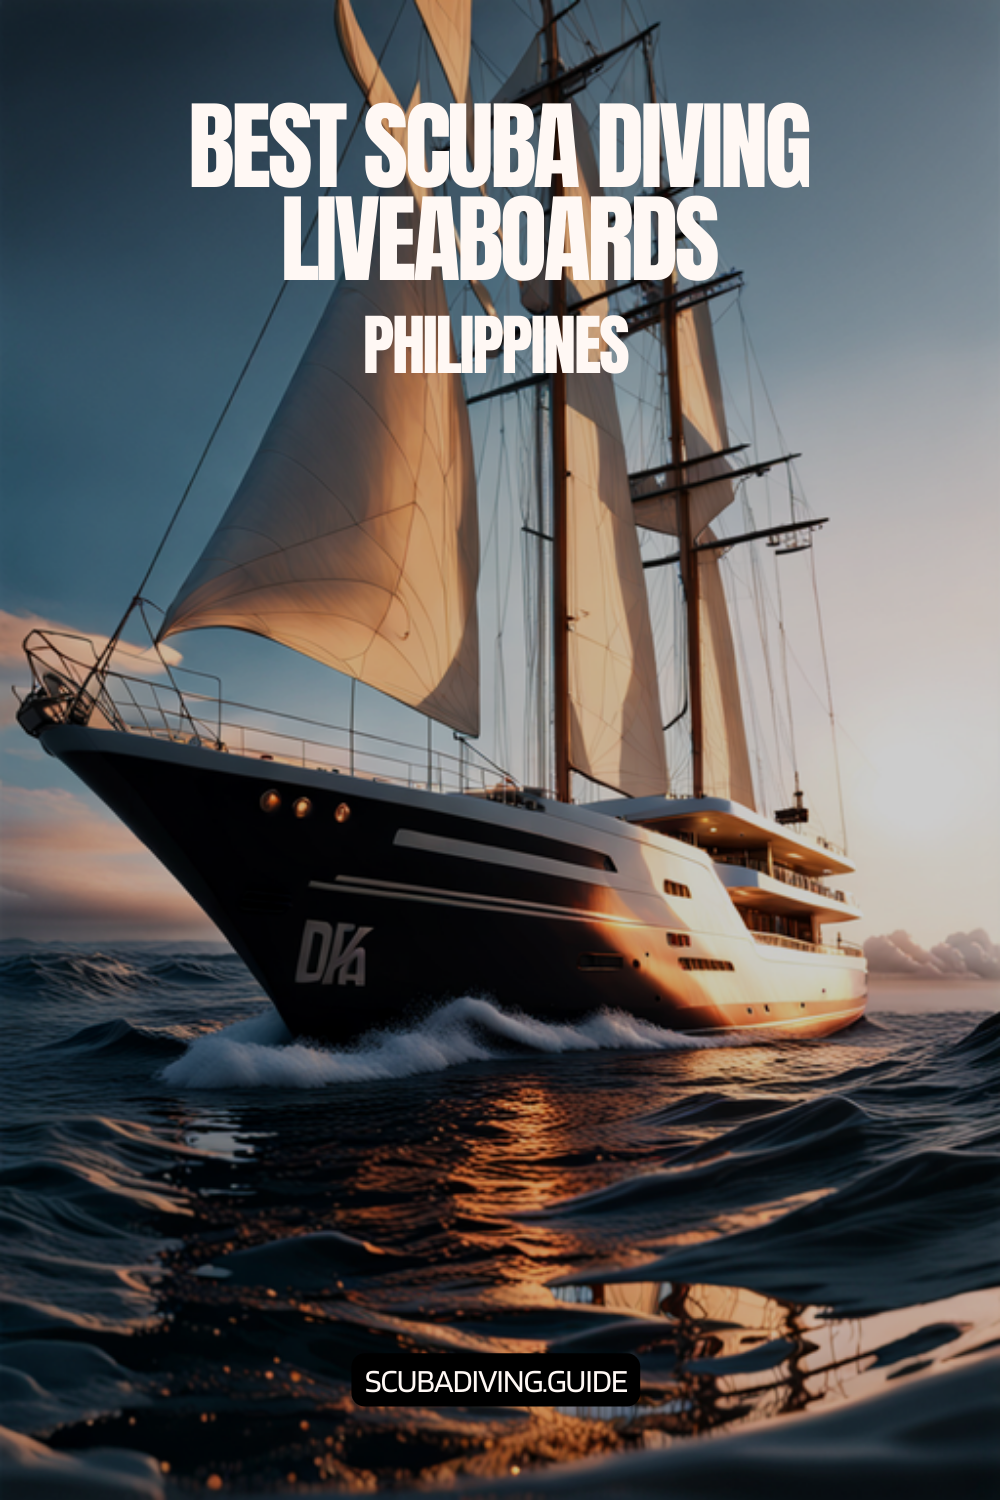 The Philippines Liveaboards